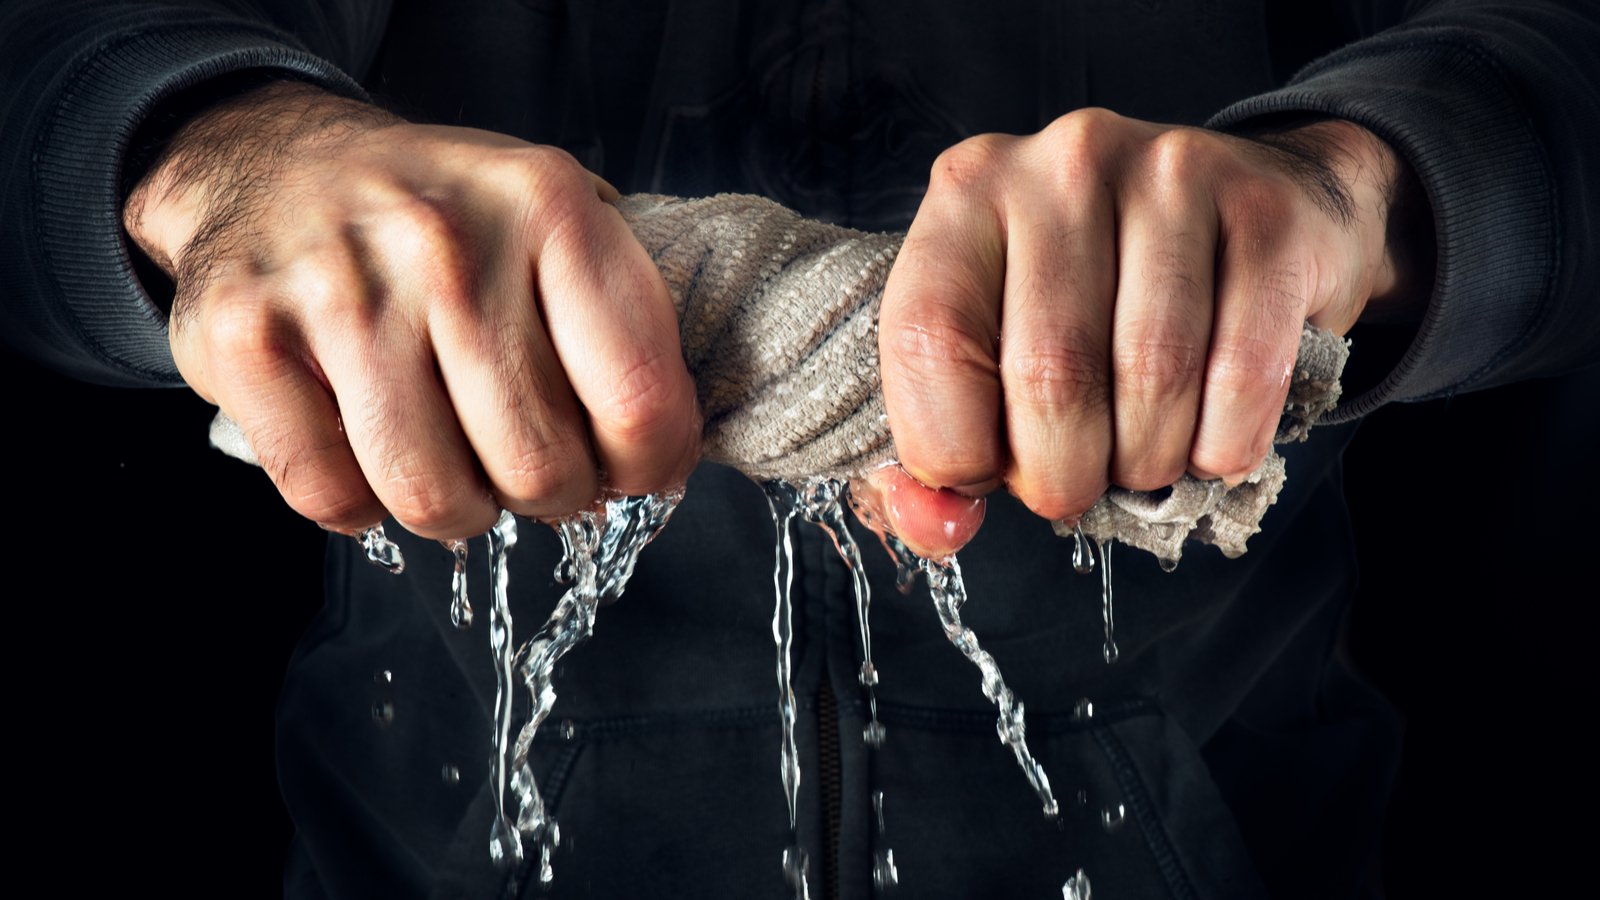 Man squeezing water out of a rag representing Top Short Squeeze Stocks to Watch.